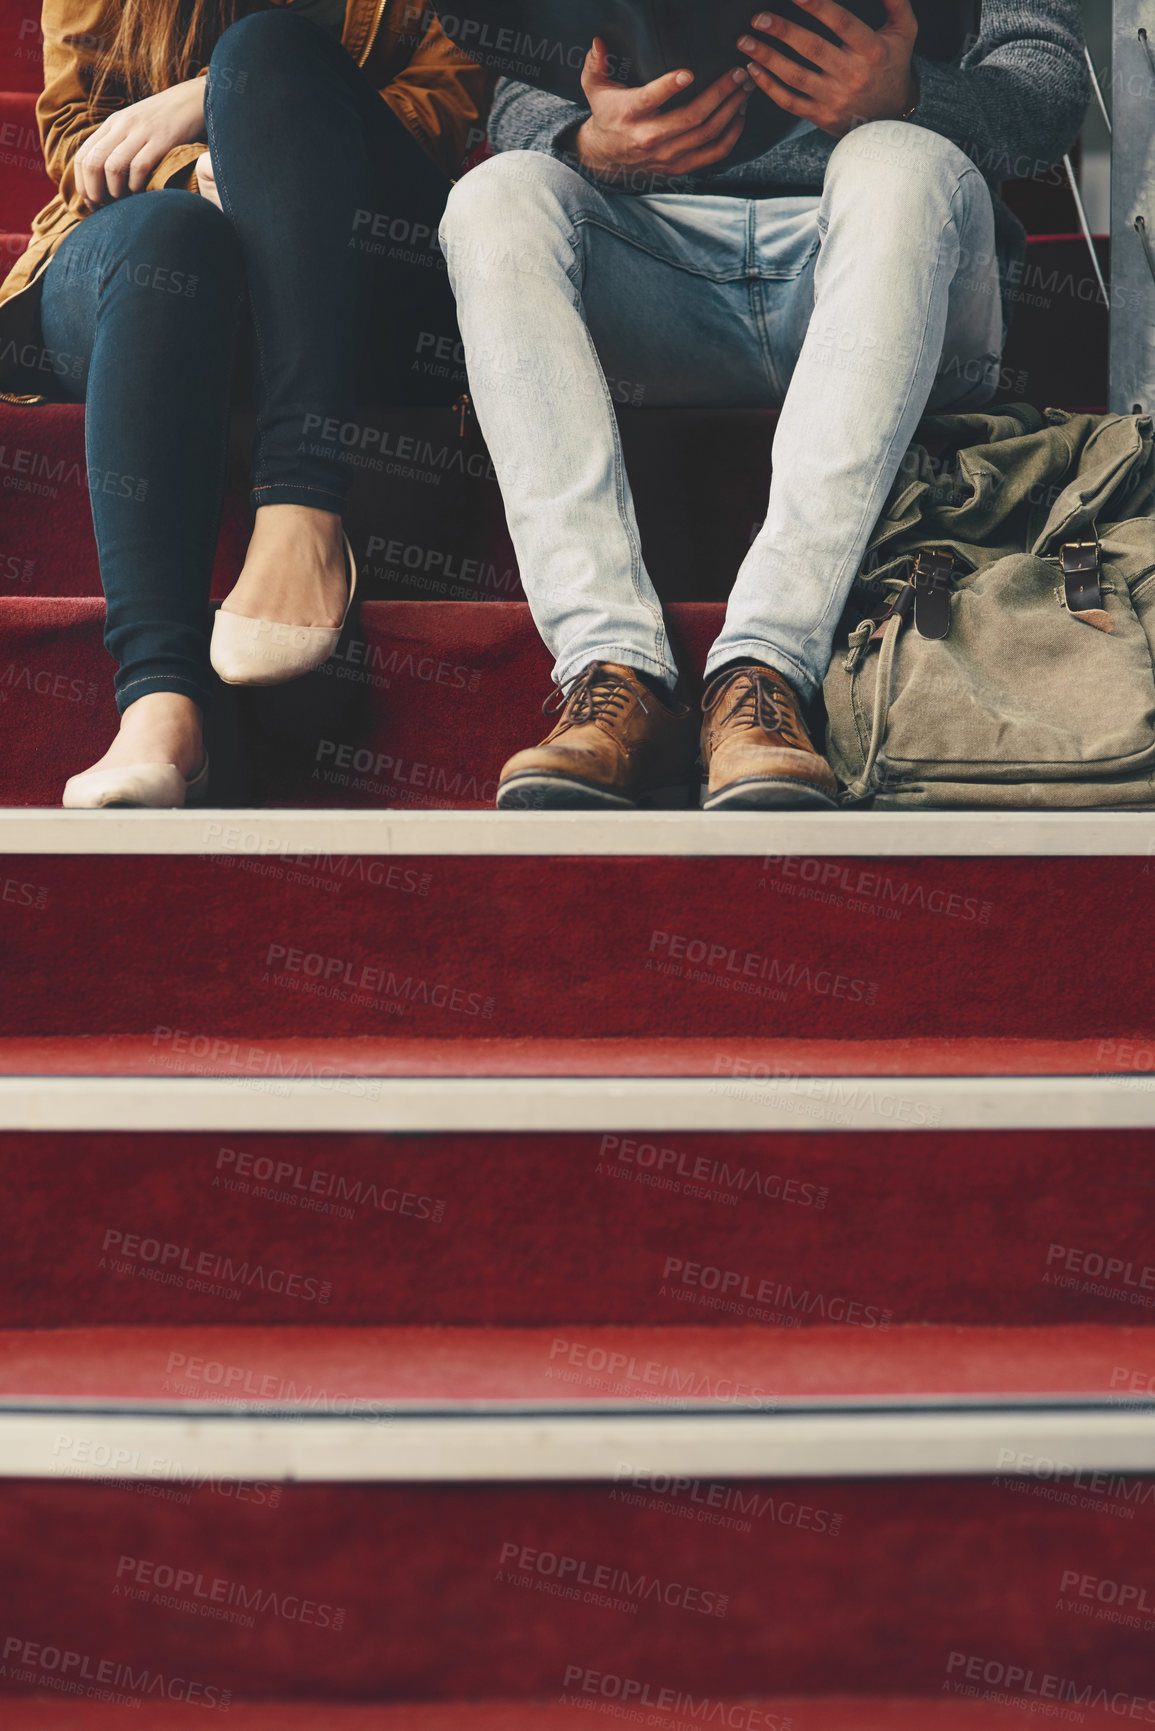 Buy stock photo Cropped shot of two unrecognizable university students studying while sitting on a staircase on campus